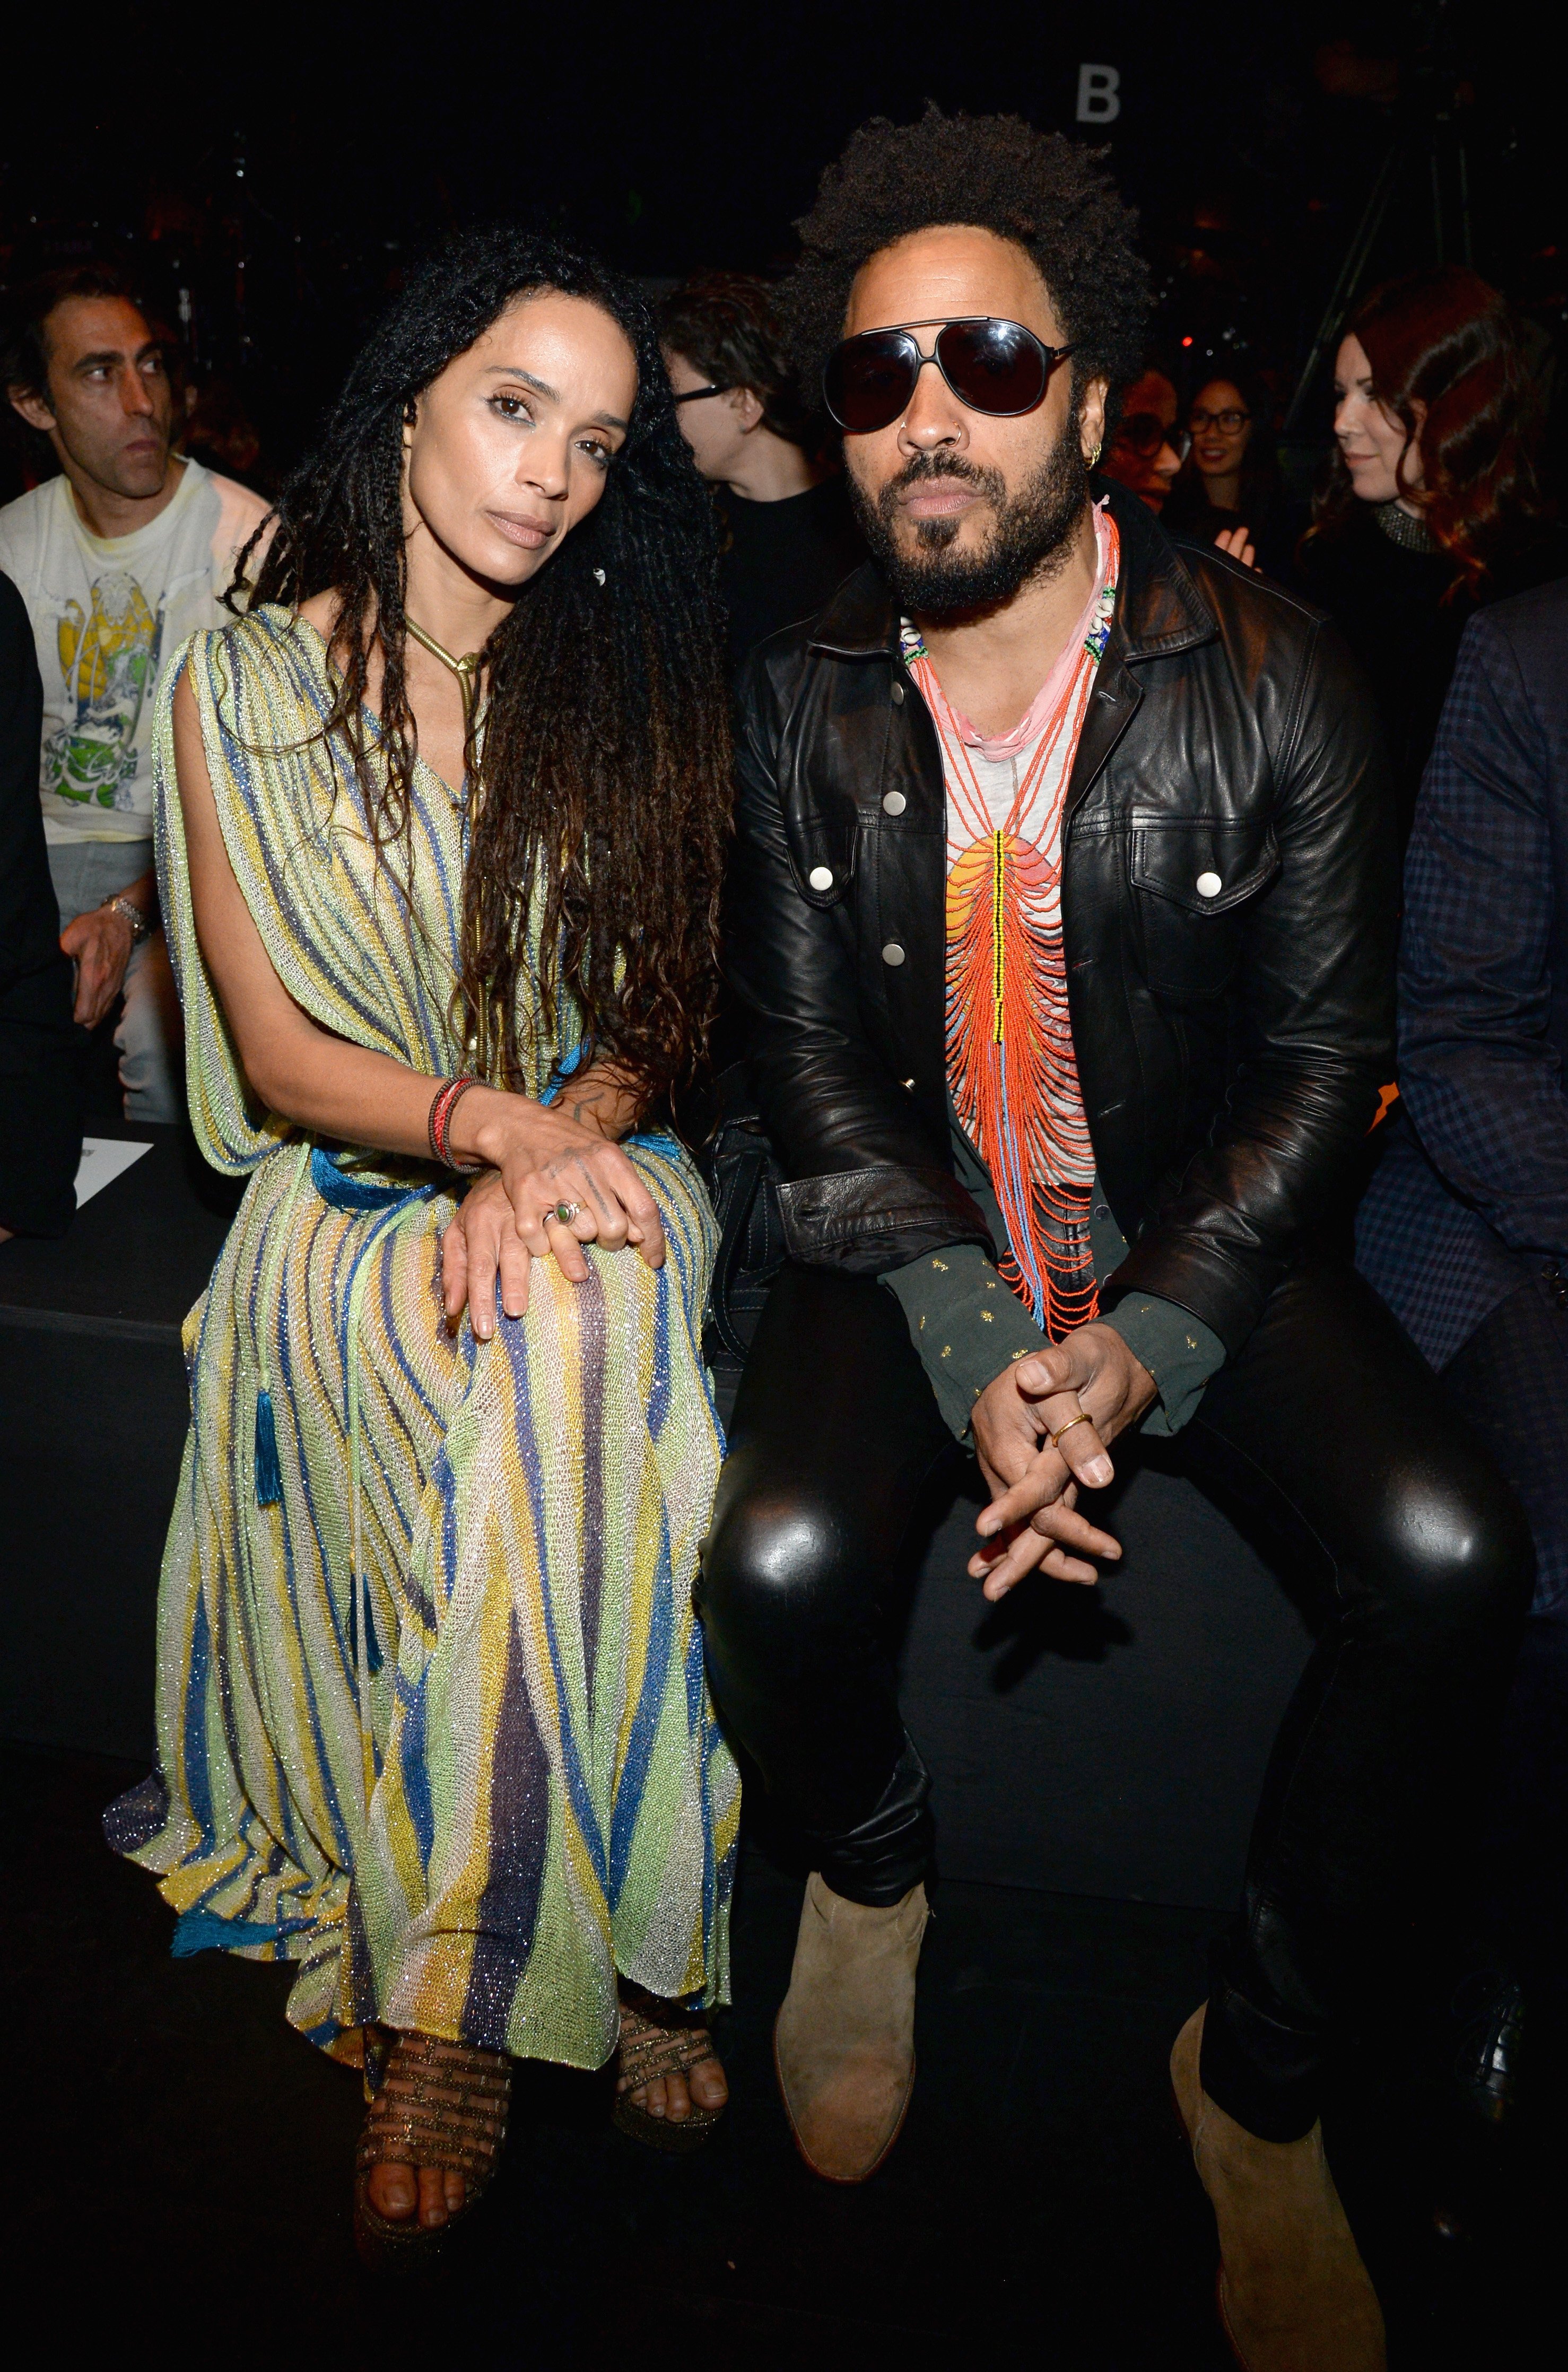 Lisa Bonet and Lenny Kravitz attend Saint Laurent at the Palladium on February 10, 2016 in Los Angeles, California | Photo: Getty Images